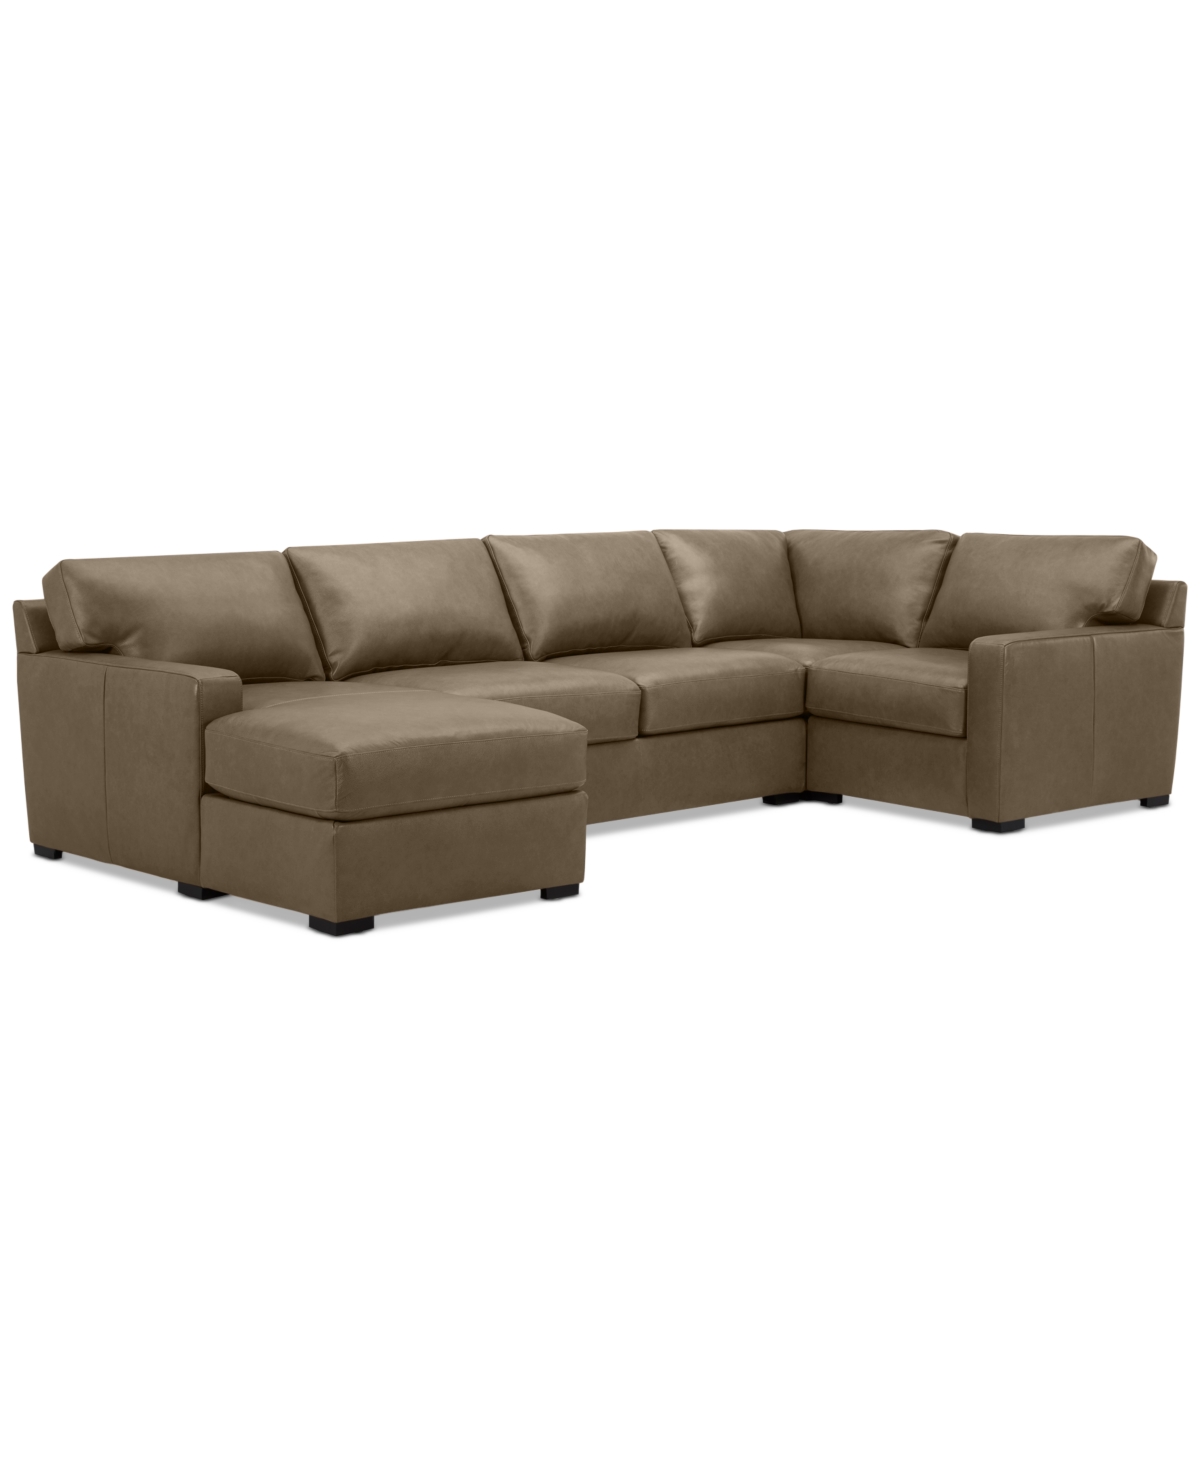 Macy's Radley 136" 4-pc. Leather Square Corner Modular Chaise Sectional, Created For  In Green